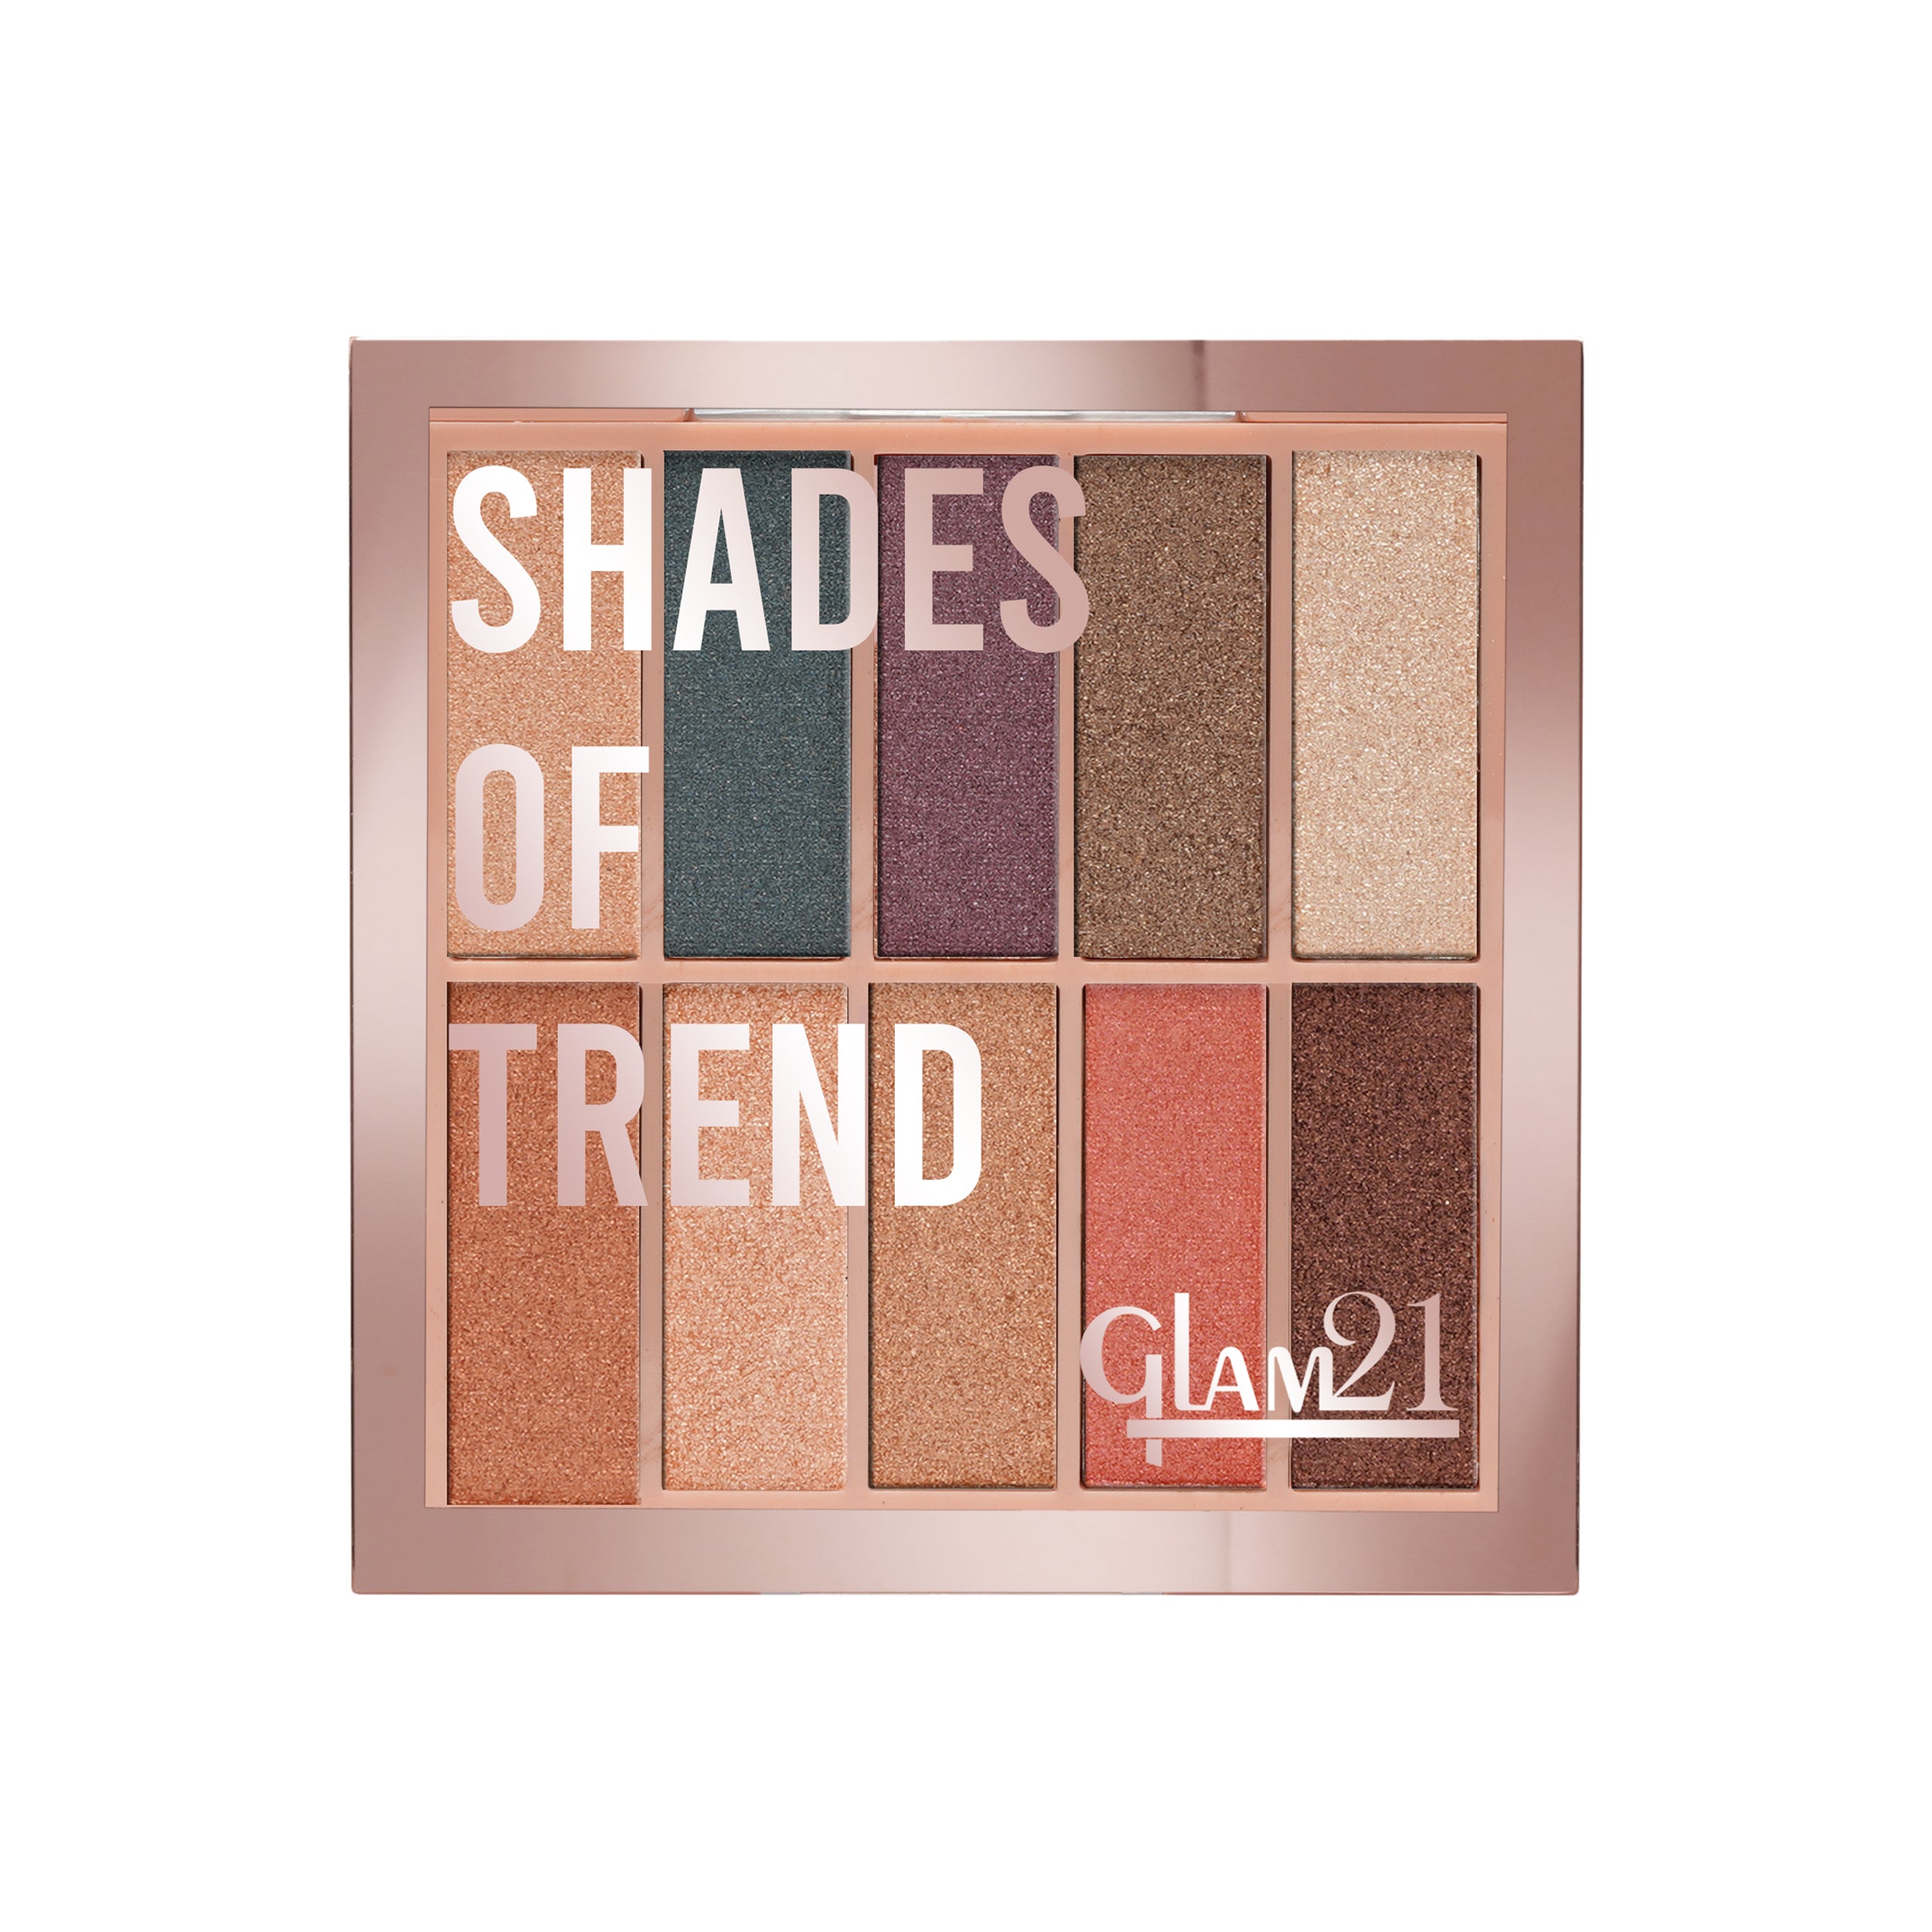 Glam21 Shades of Trend Eyeshadow Palette 10 Highly Pigmented Shades Shimmery Finish, 12gm Shade -03